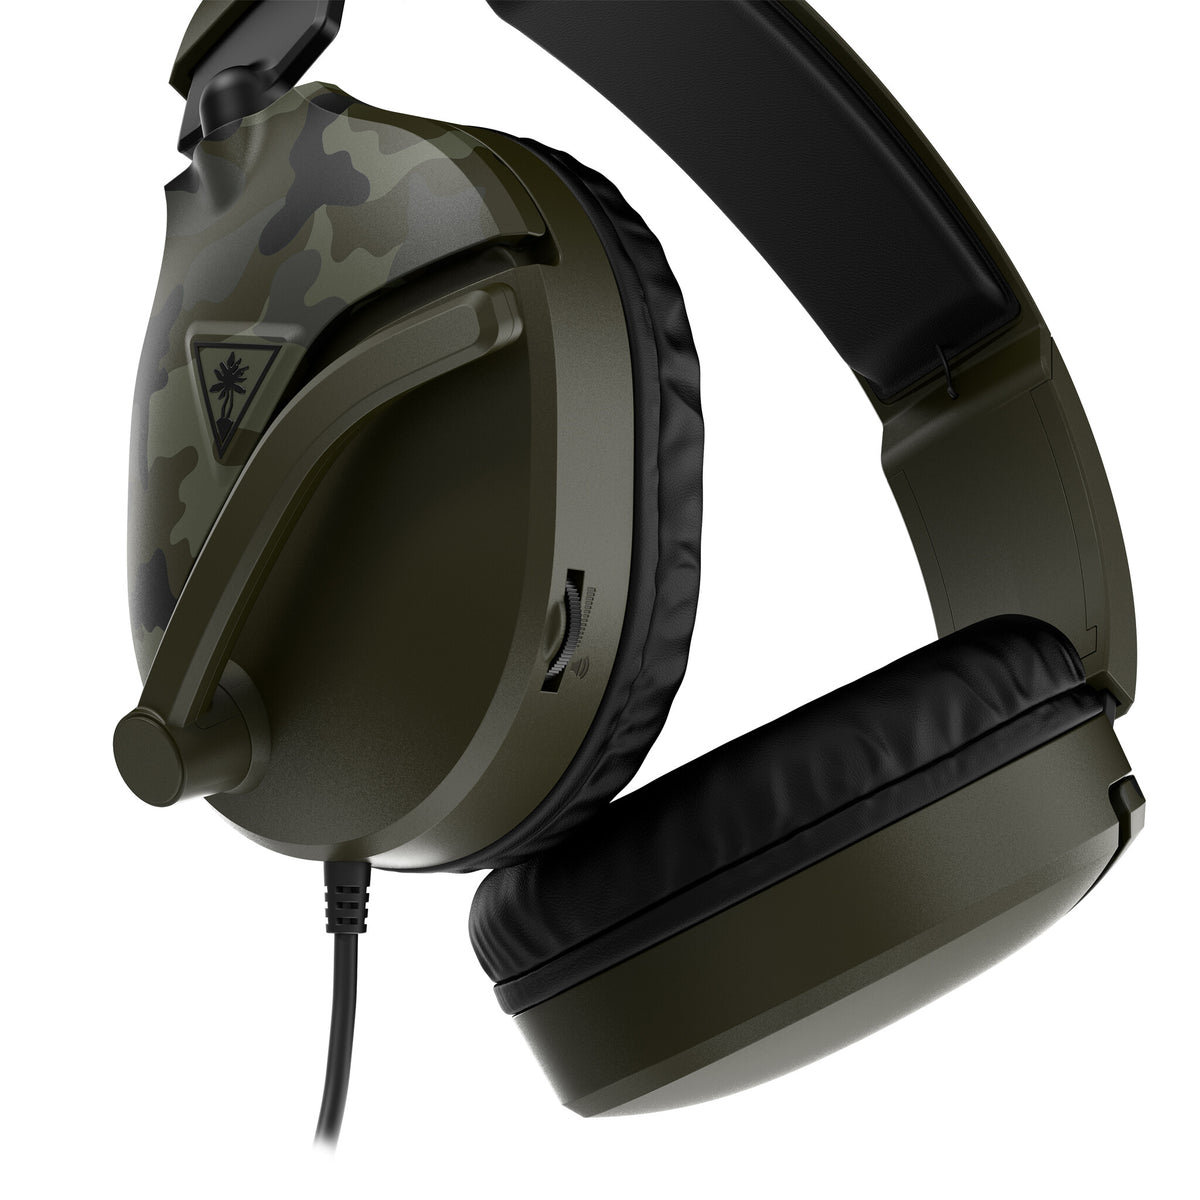 Turtle Beach Recon 70 - Wired Gaming Headset in Camo Green